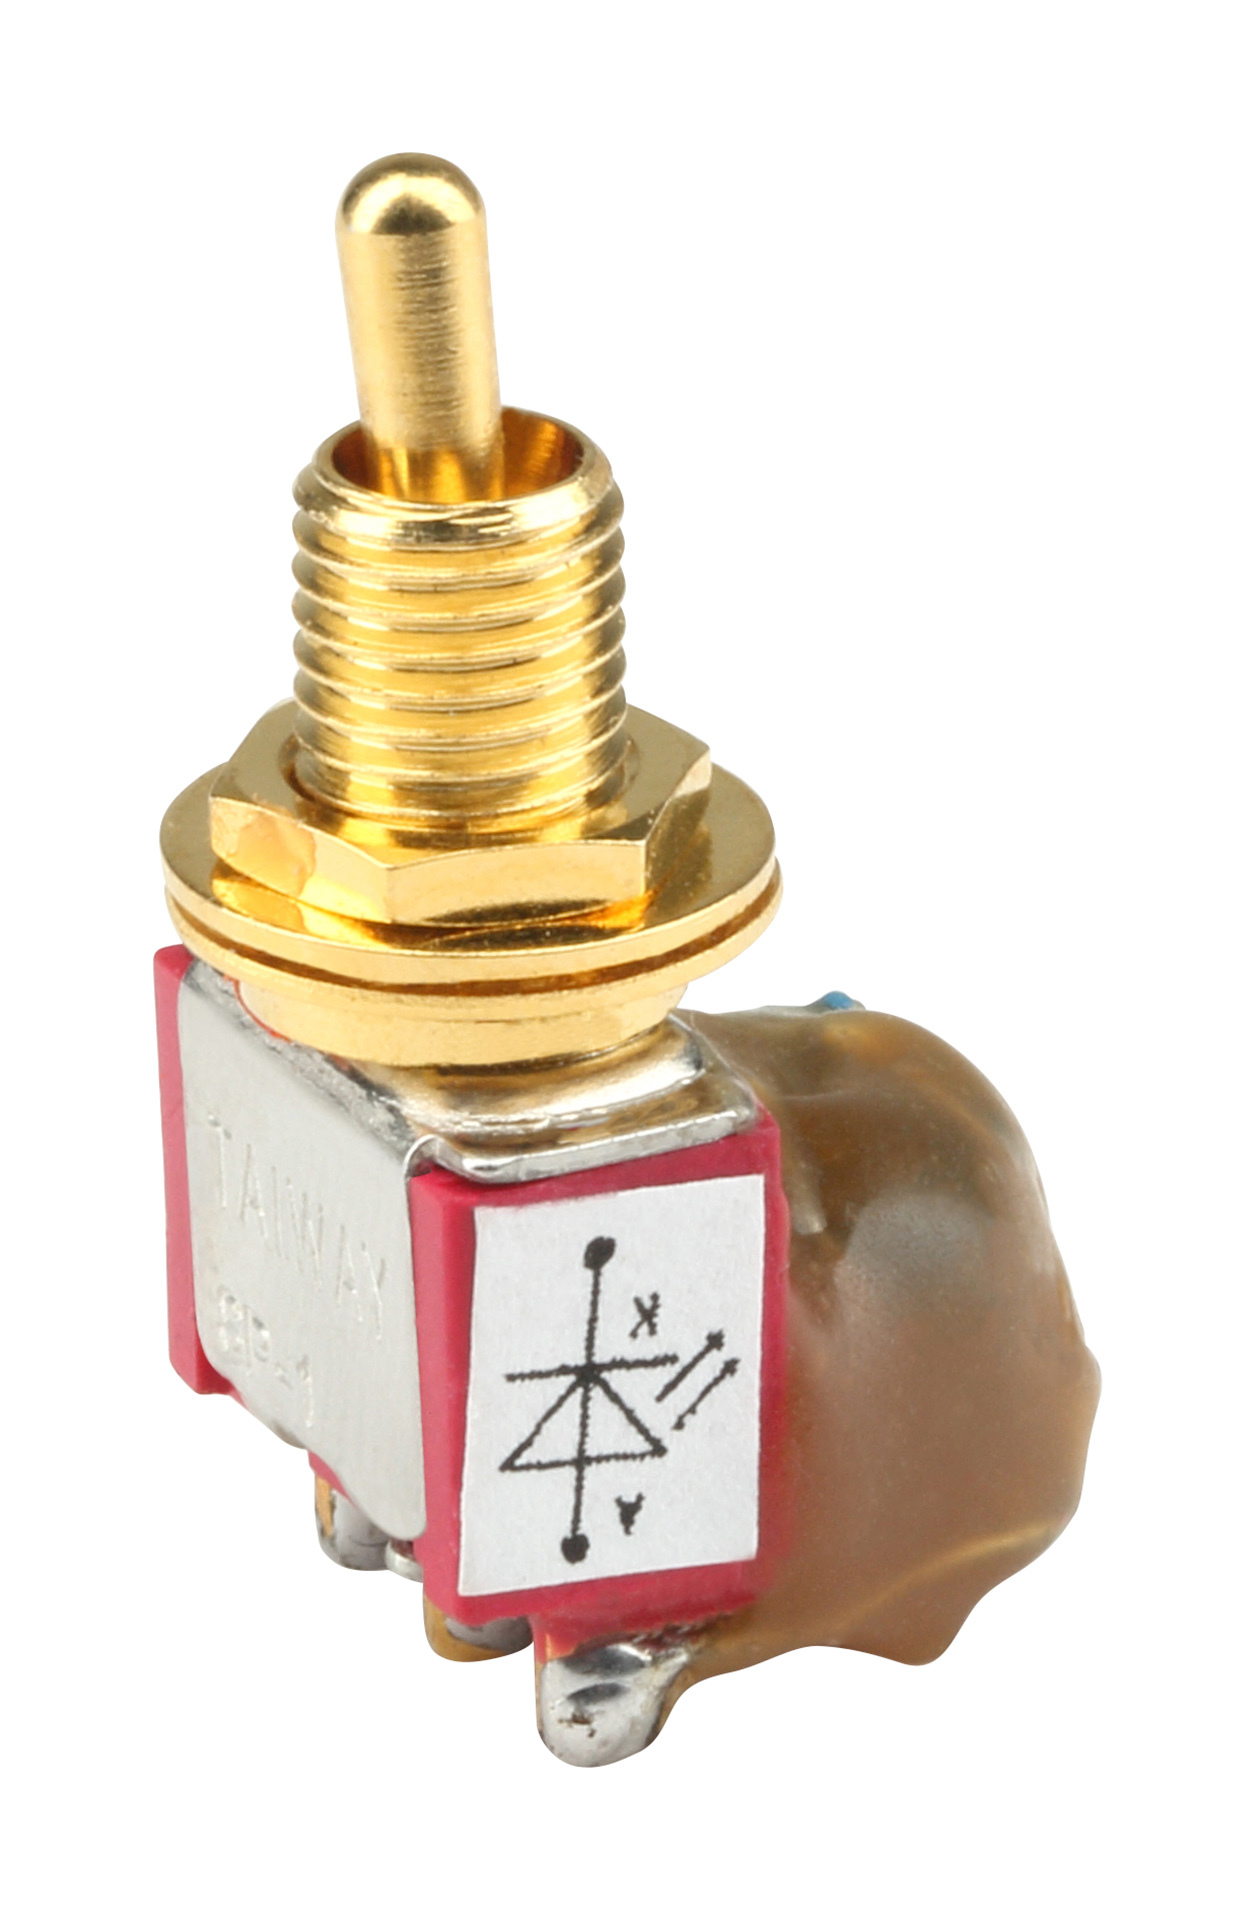 MEC LED Mini Toggle Switch Assembly, Short, Solder Lugs, with Trim Pot, ON/ON, SPDT - Gold